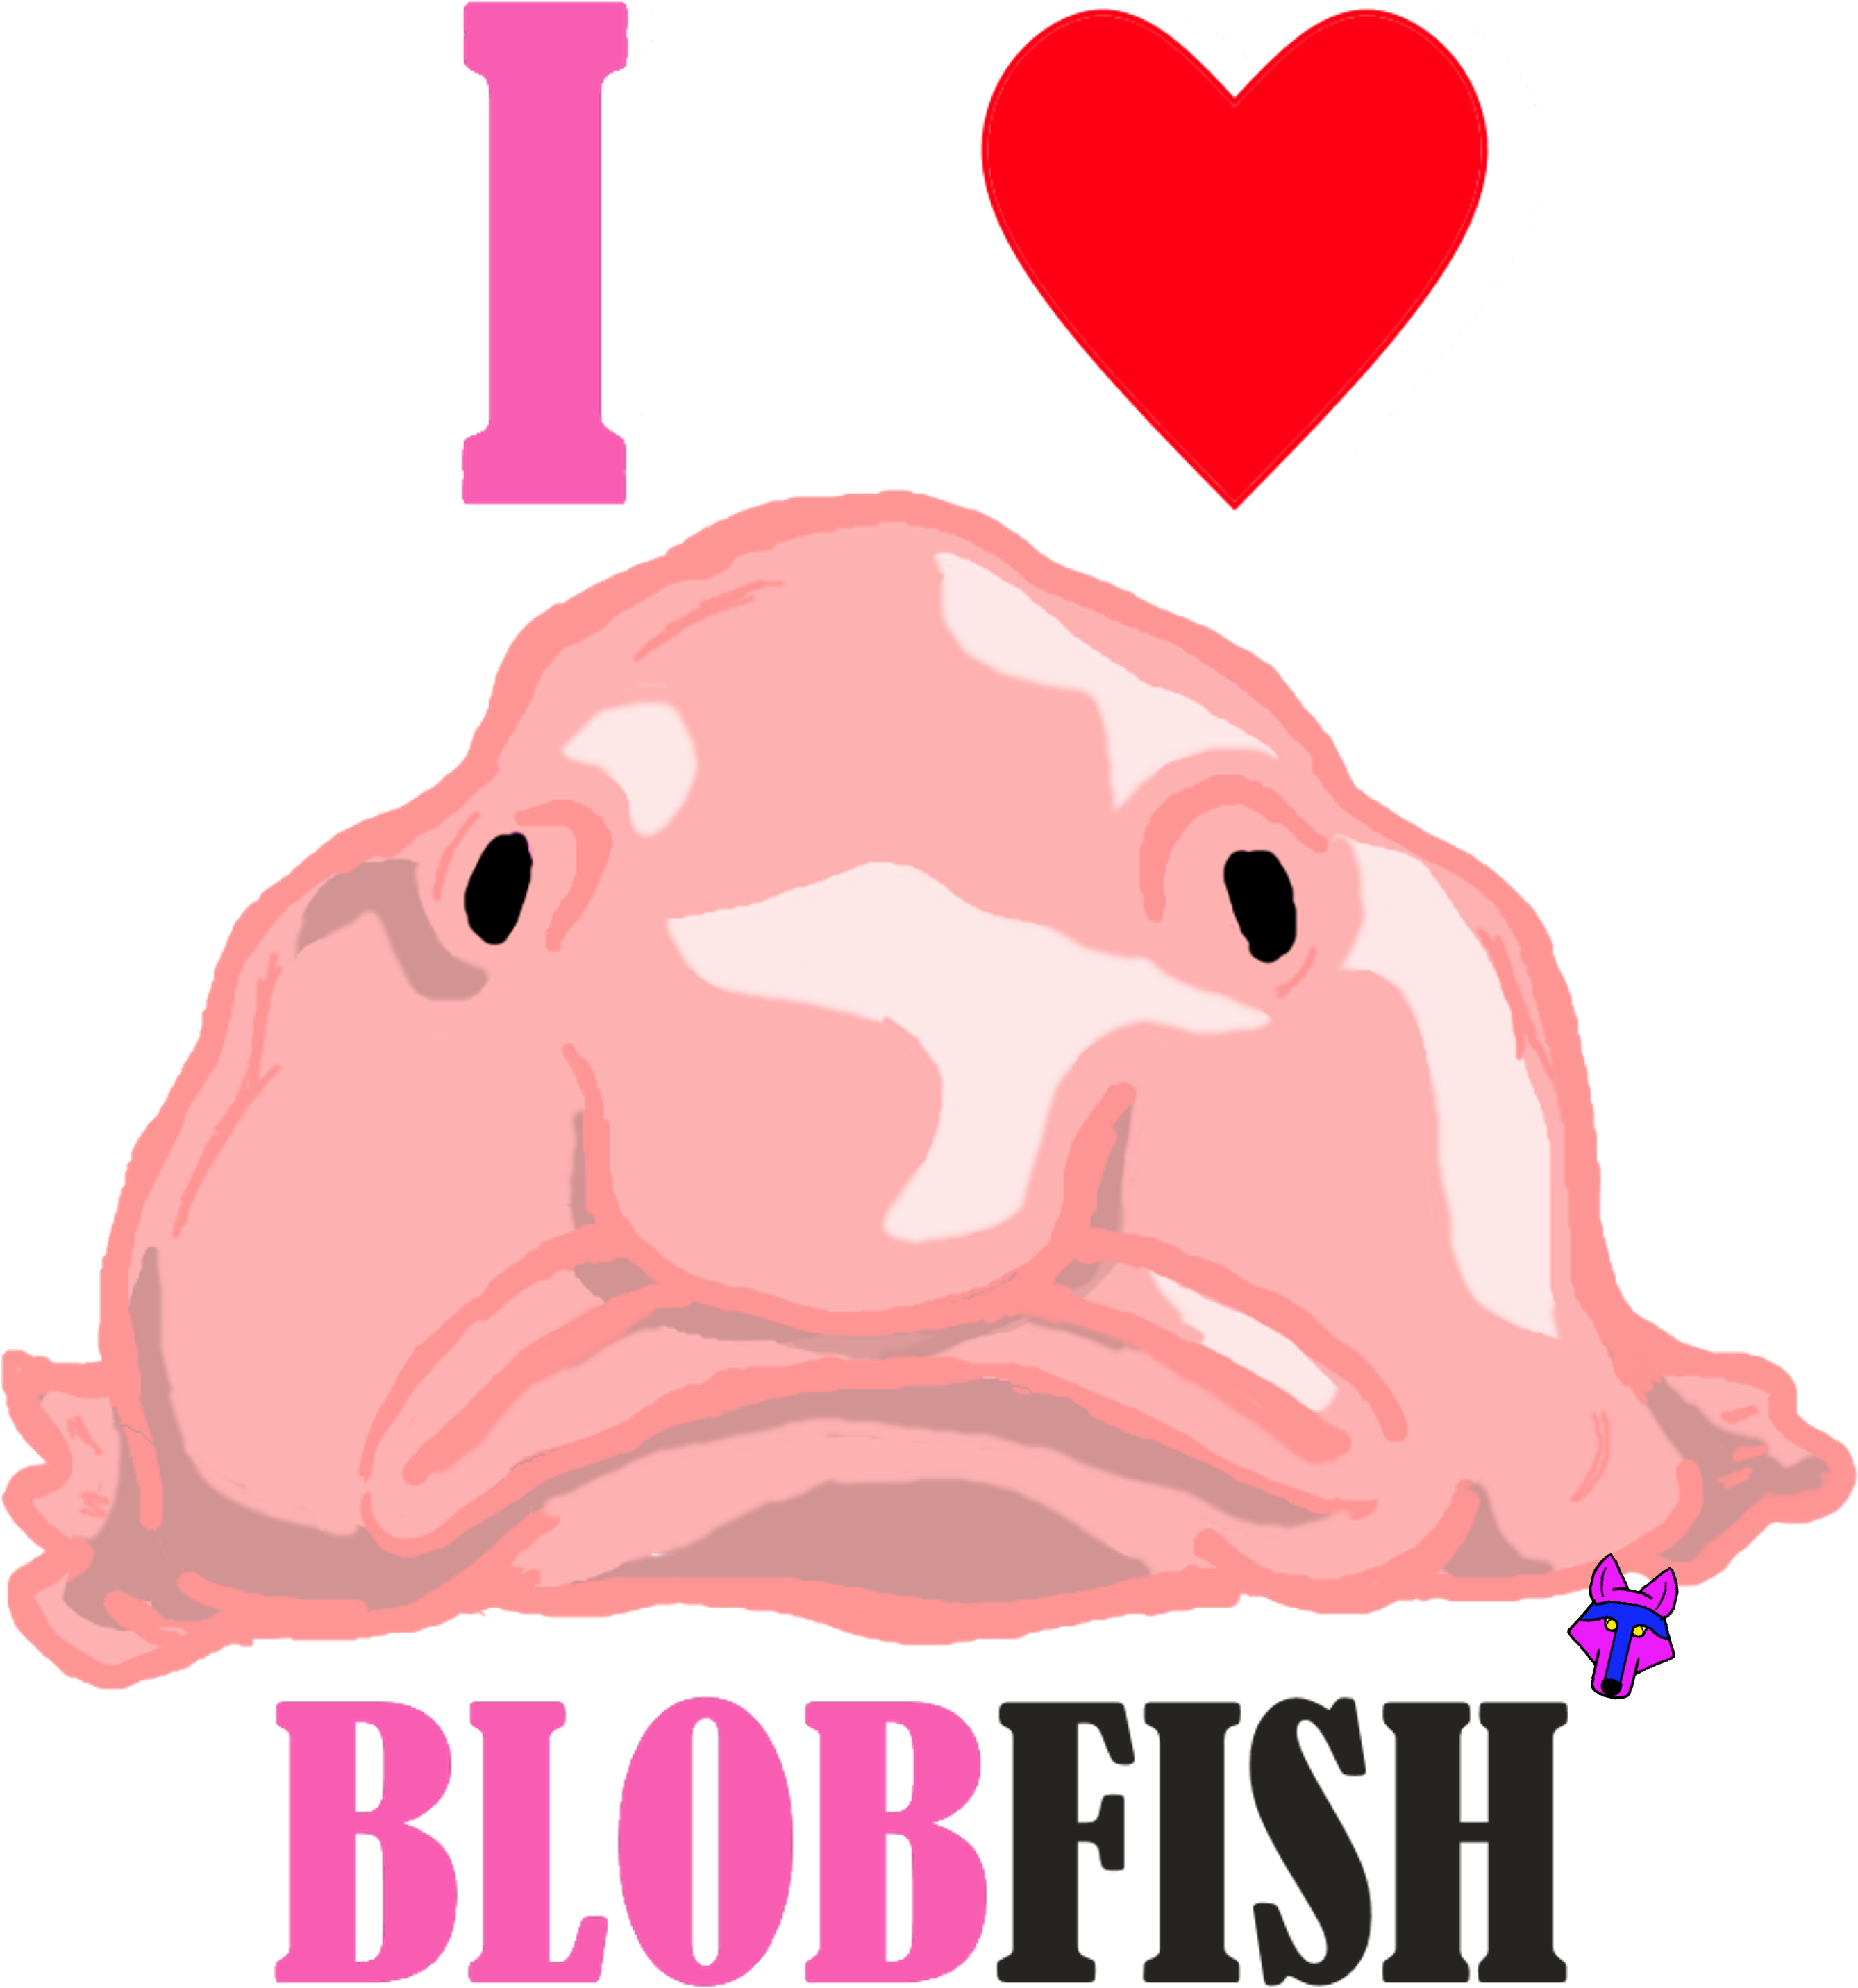 Blobfish Fabric Wallpaper and Home Decor  Spoonflower